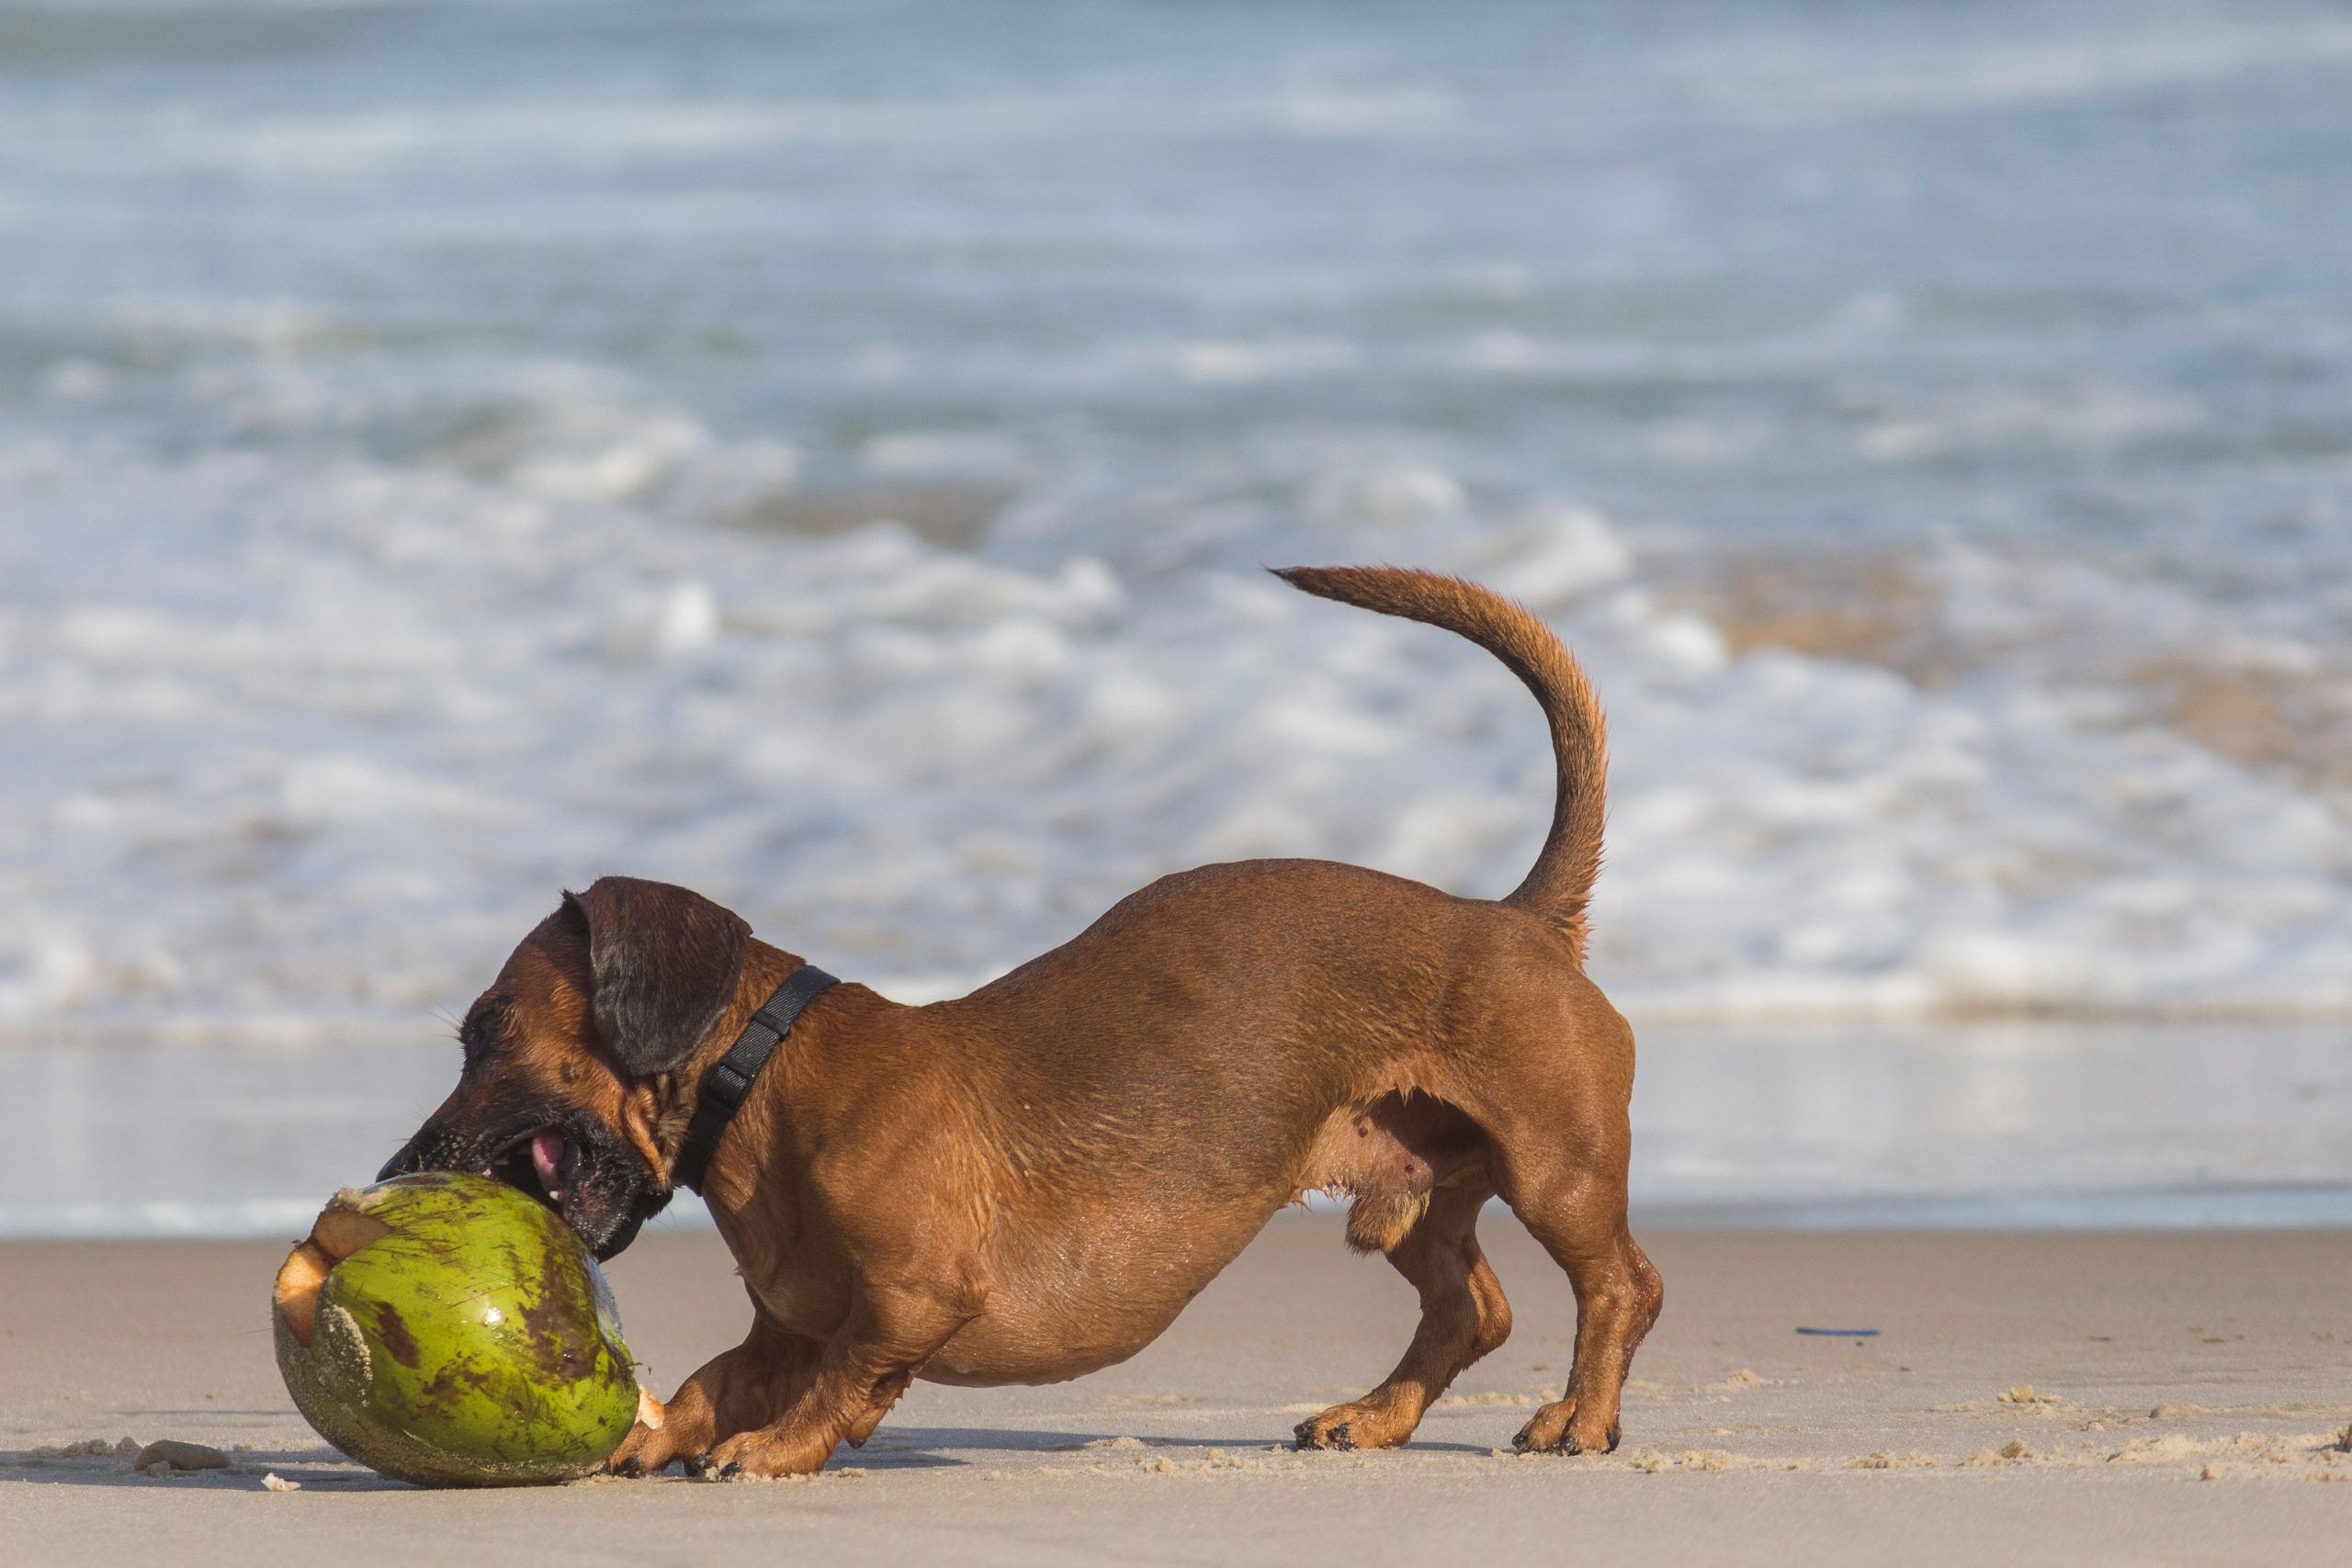 A dog playing with a coconut on the beach.